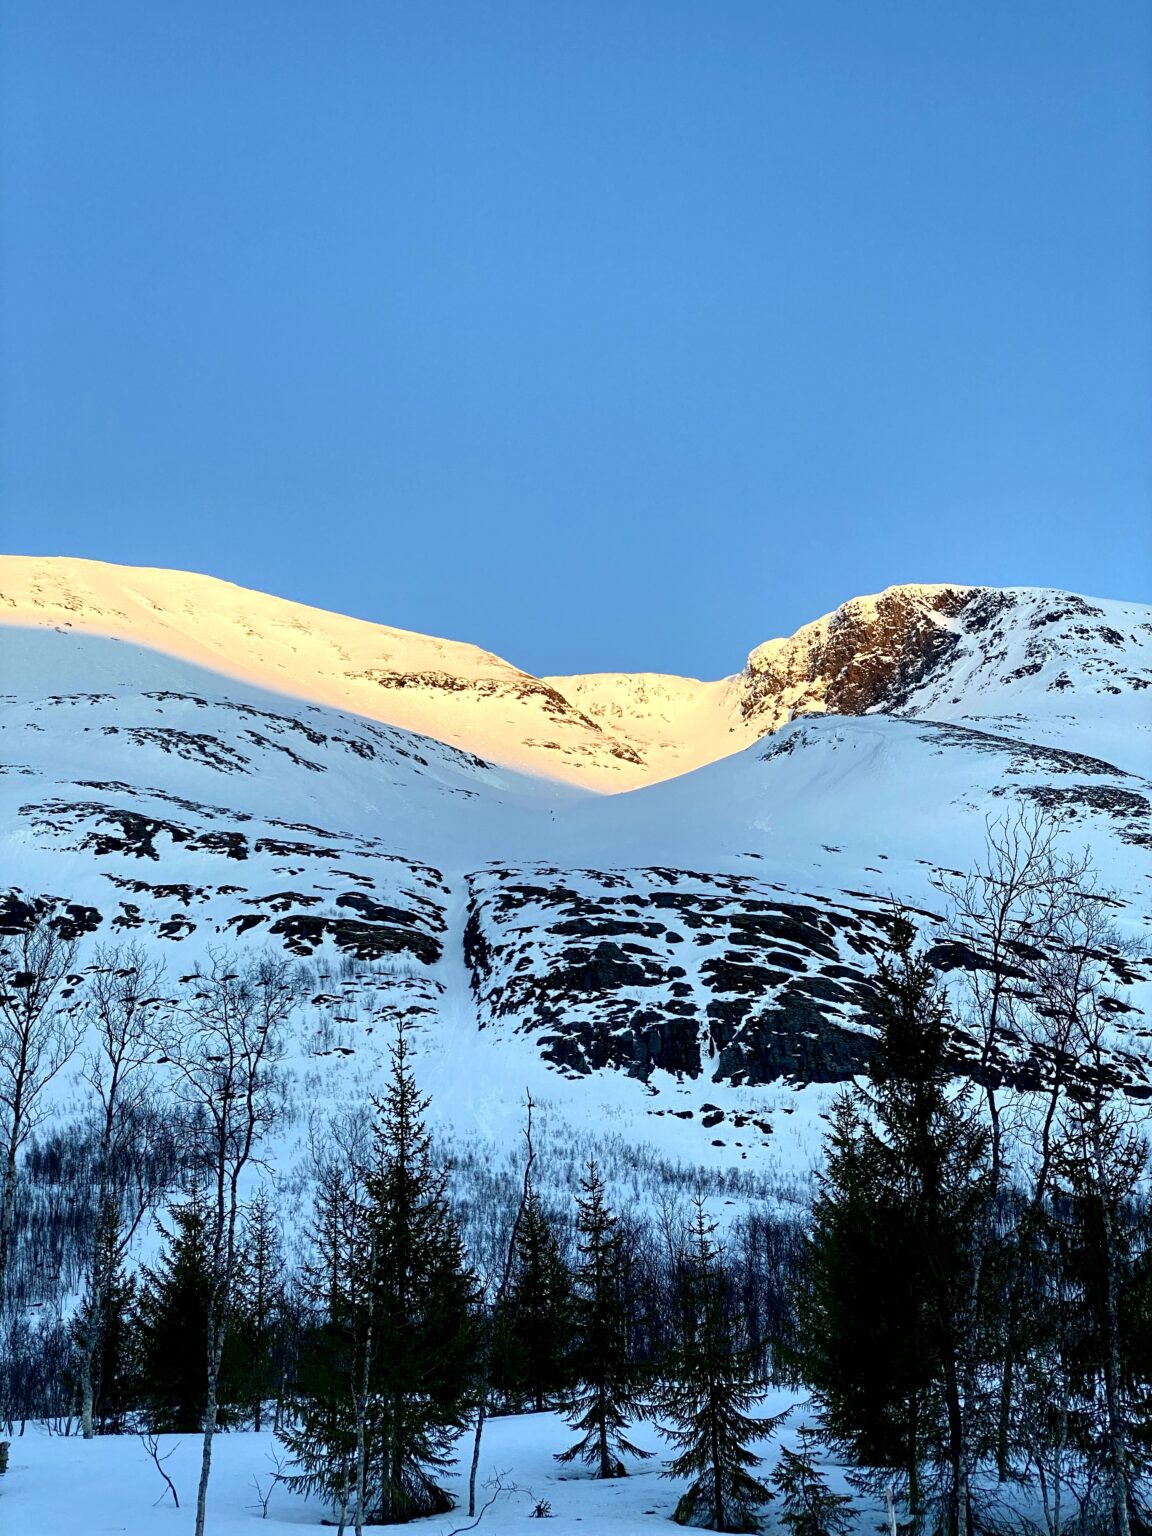 Looking up the North Bowl of Tamokfjellet in Northern Norway